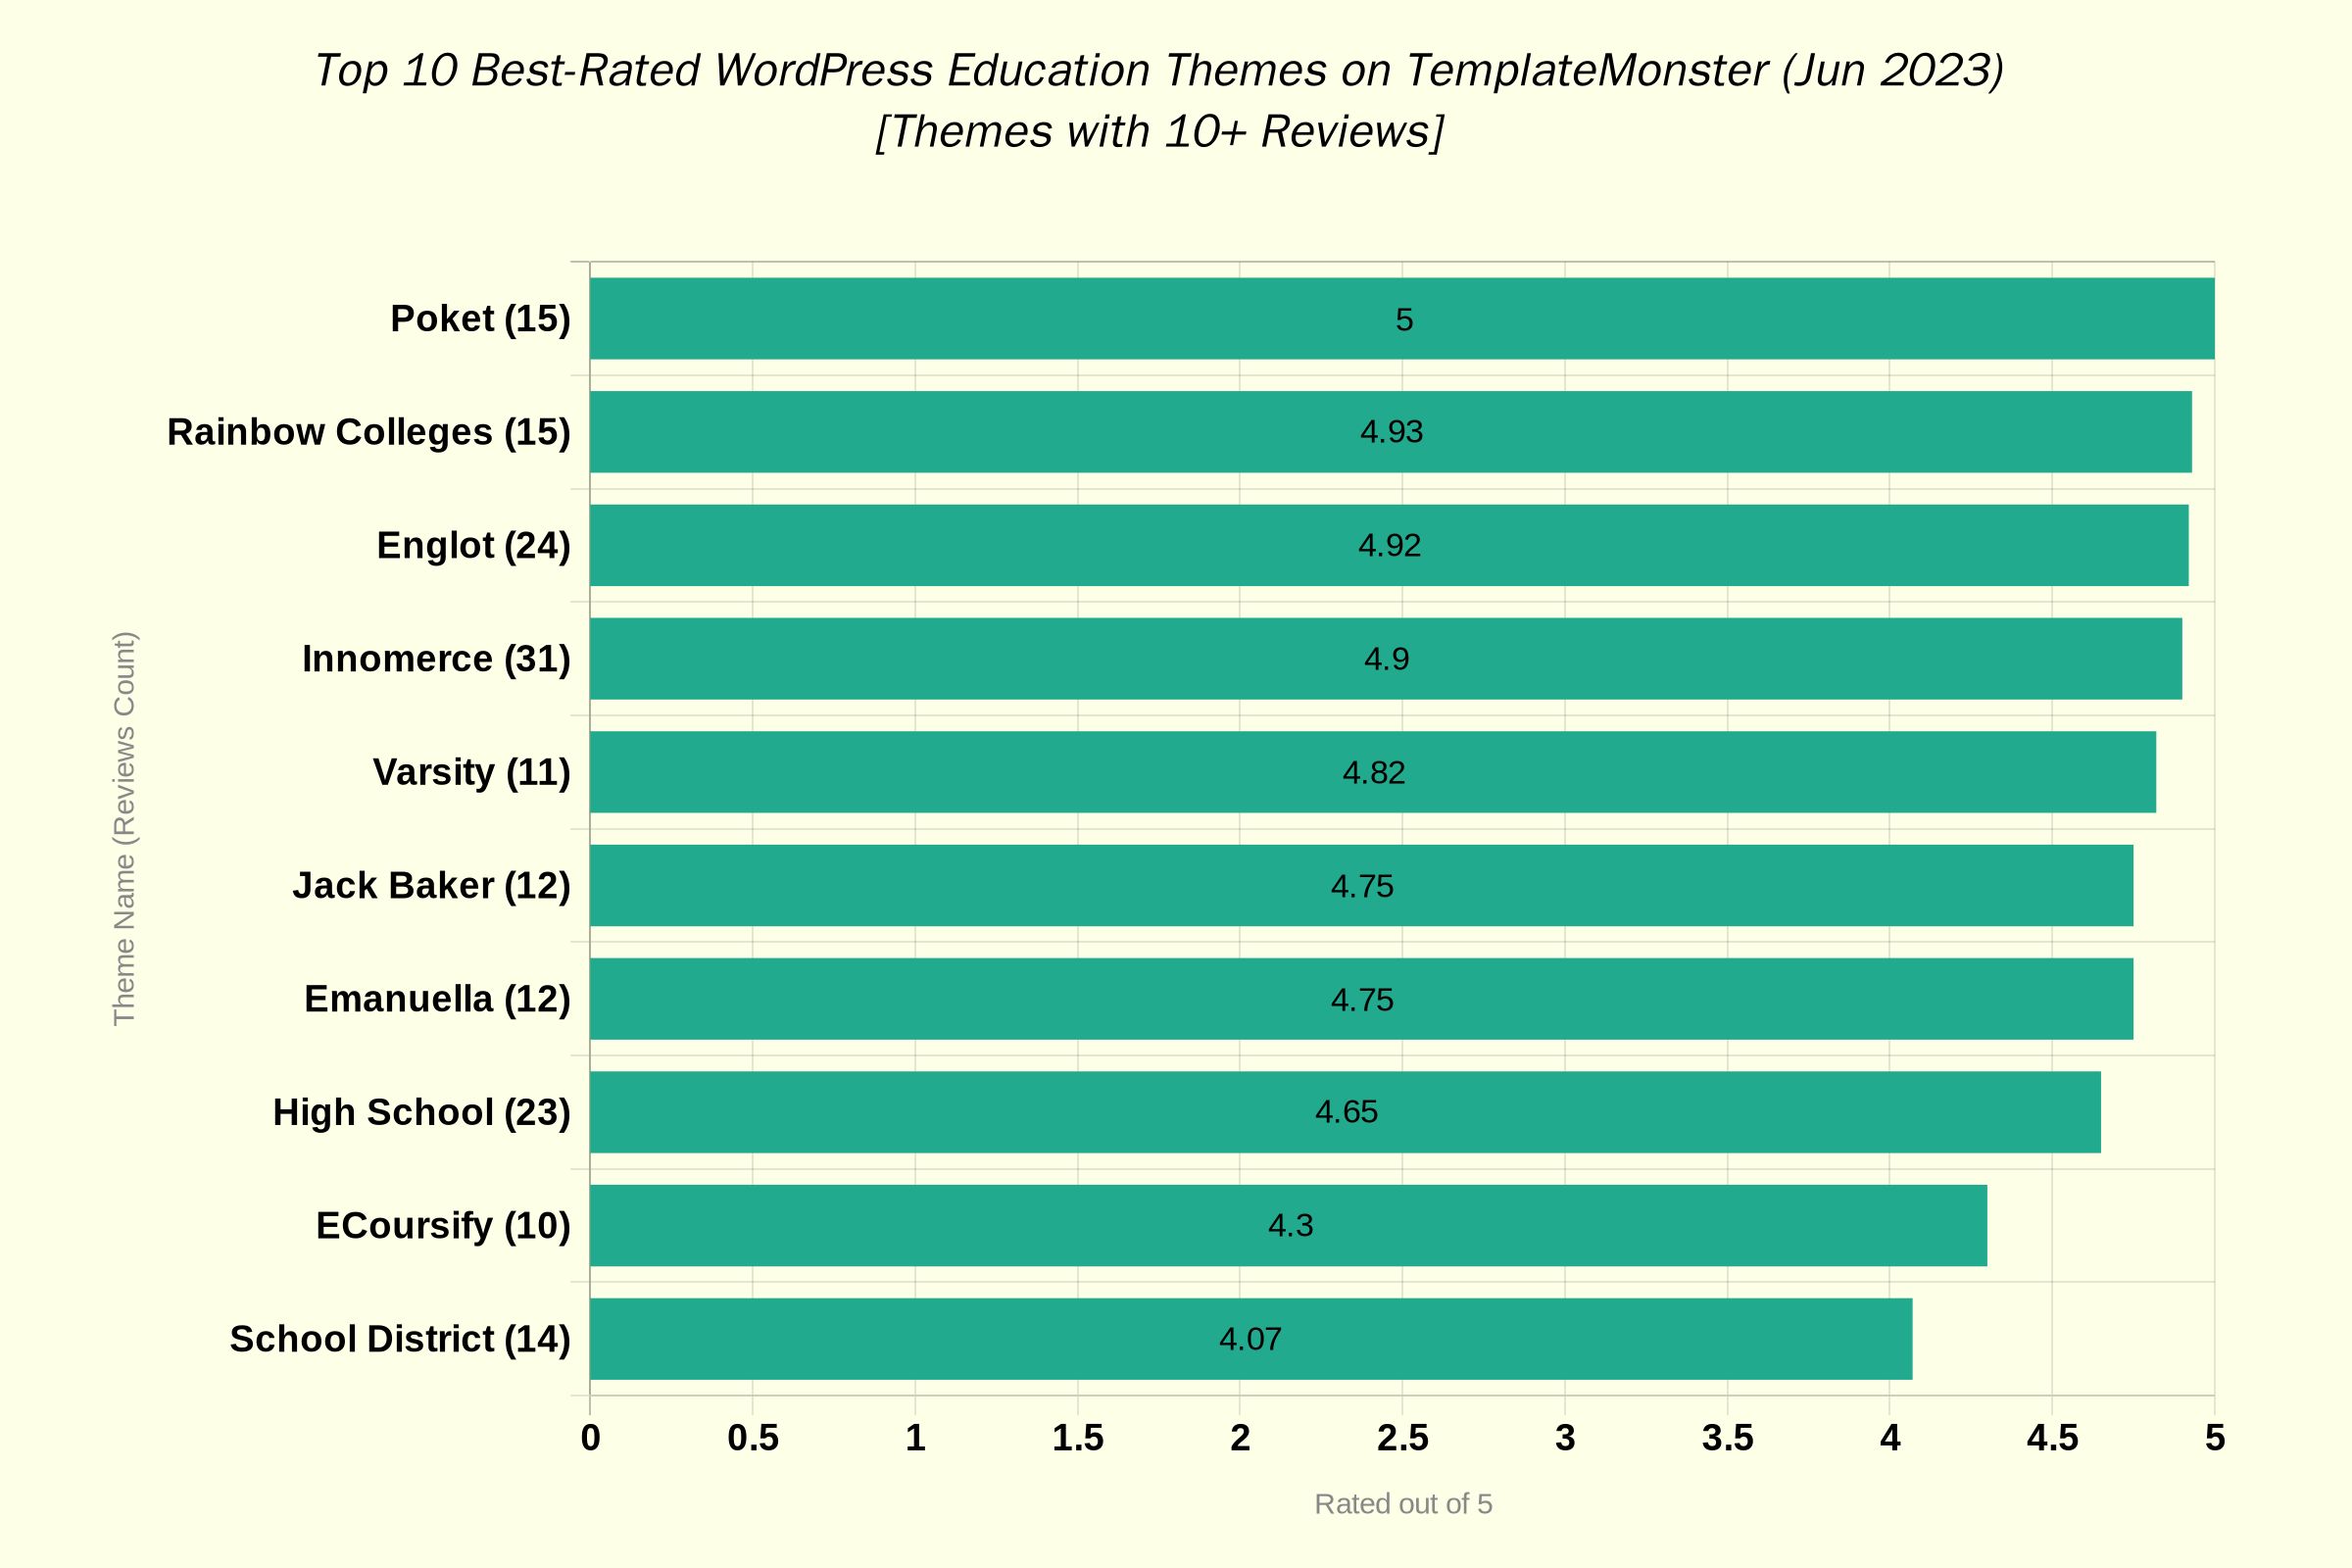 Top 10 best-rated WordPress education themes on TemplateMonster (over 10 reviews)